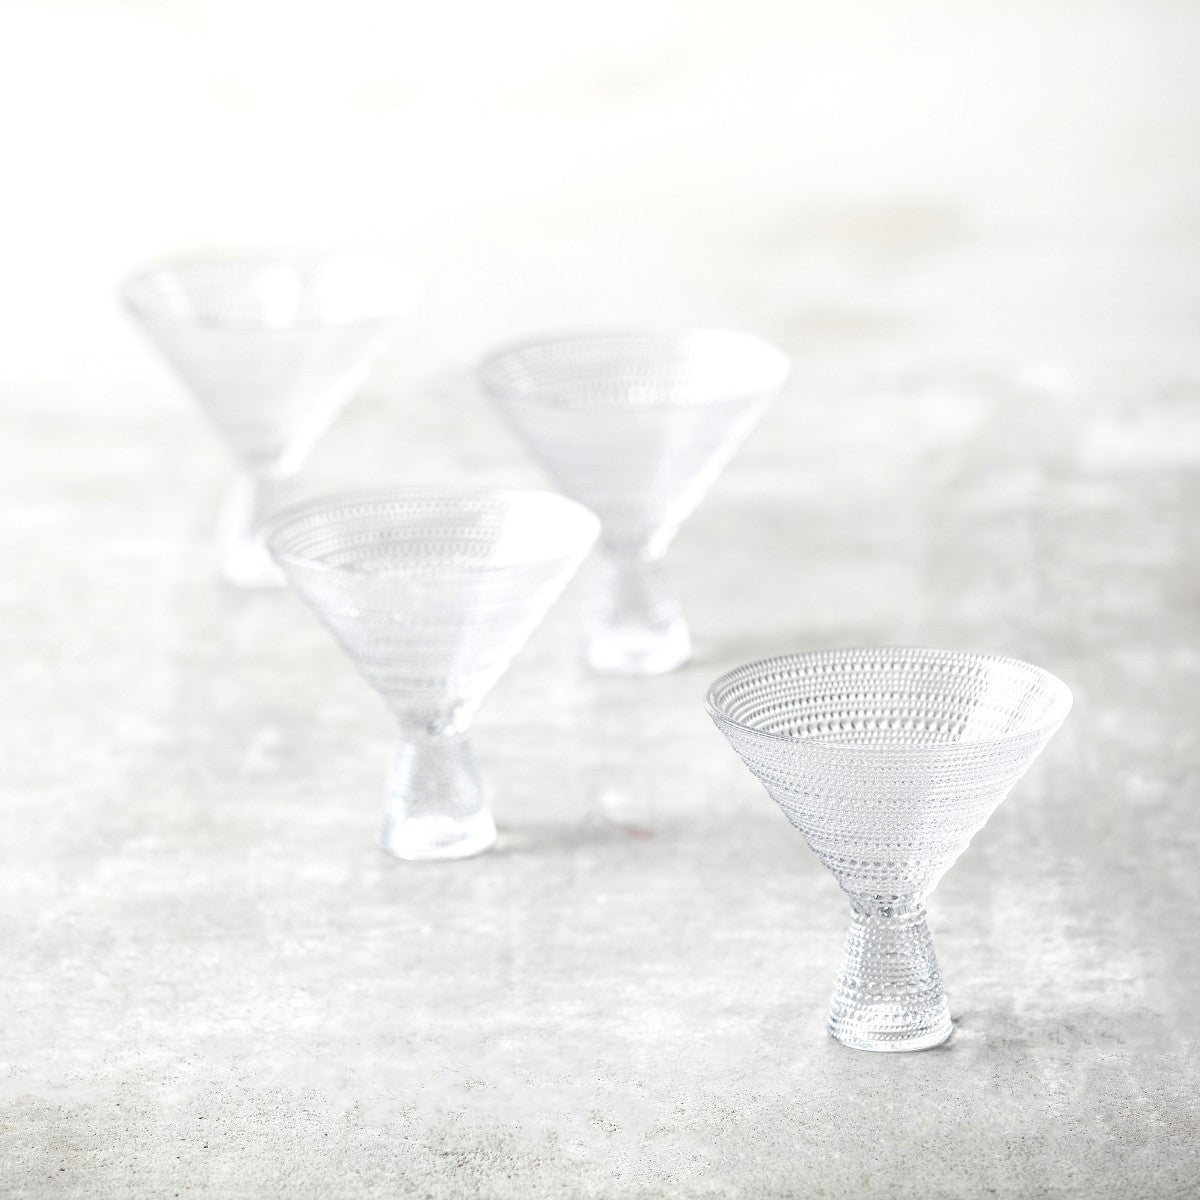 4 clear jupiter martini glasses arranged on a countertop.